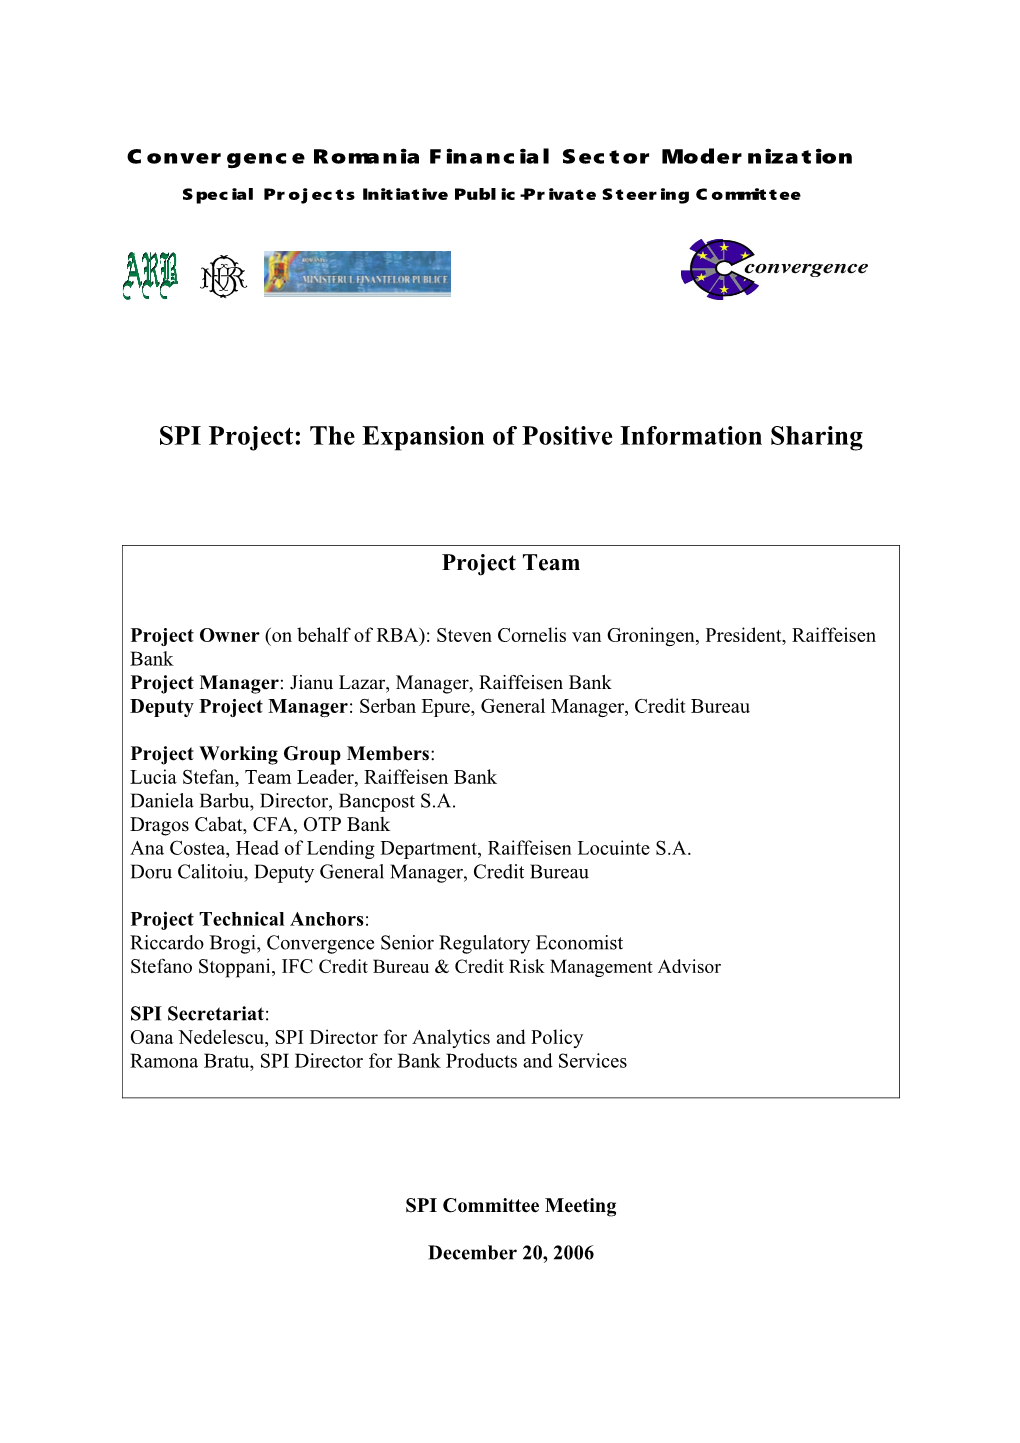 SPI Project: the Expansion of Positive Information Sharing